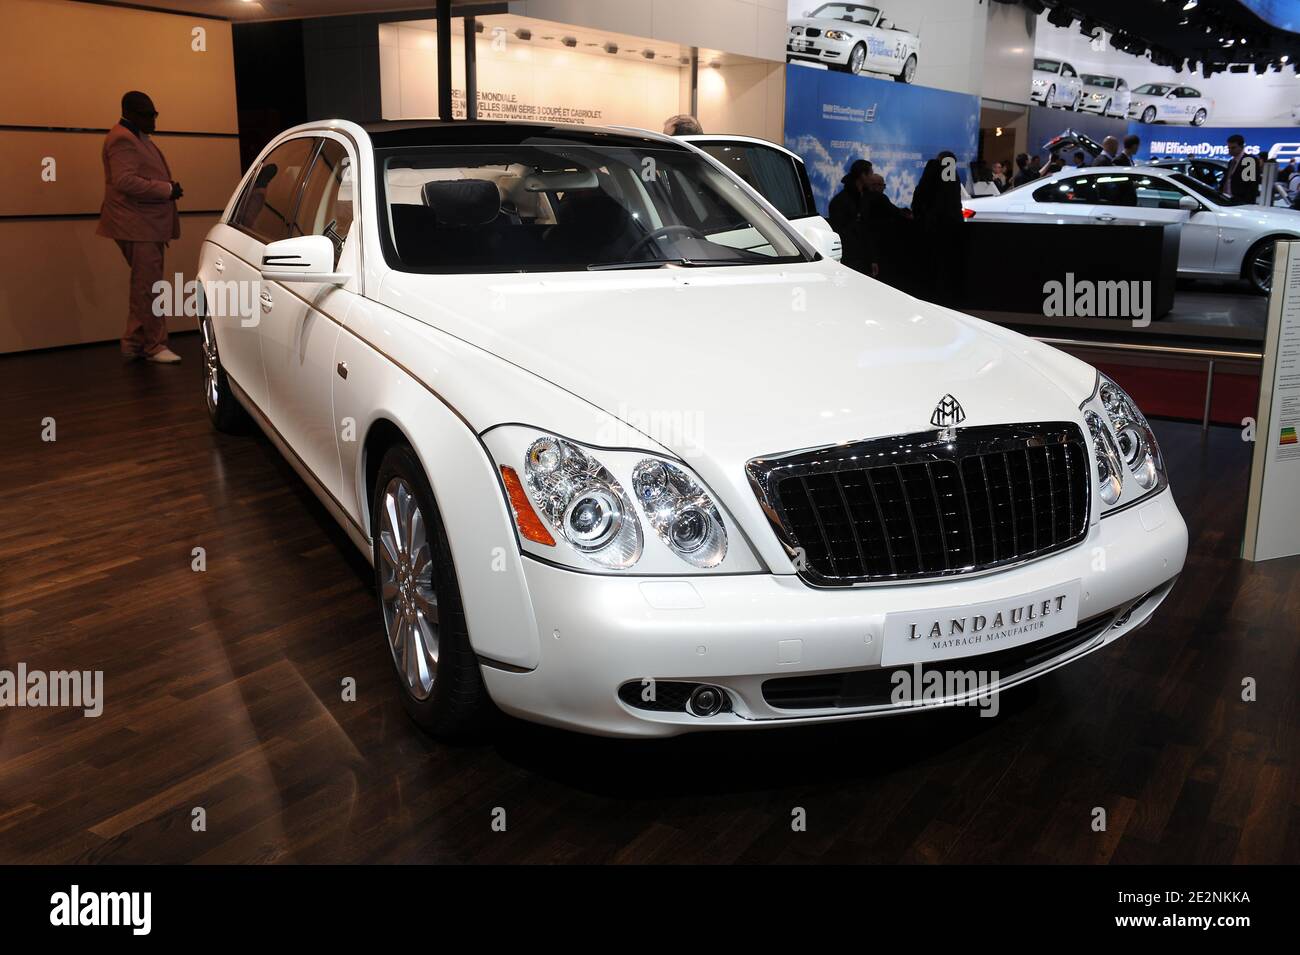 The Maybach Landaulet is on display during the 80th International Motor  Show in Geneva, Switzerland on March 2, 2010. Photo by Loona/ABACAPRESS.COM  Stock Photo - Alamy